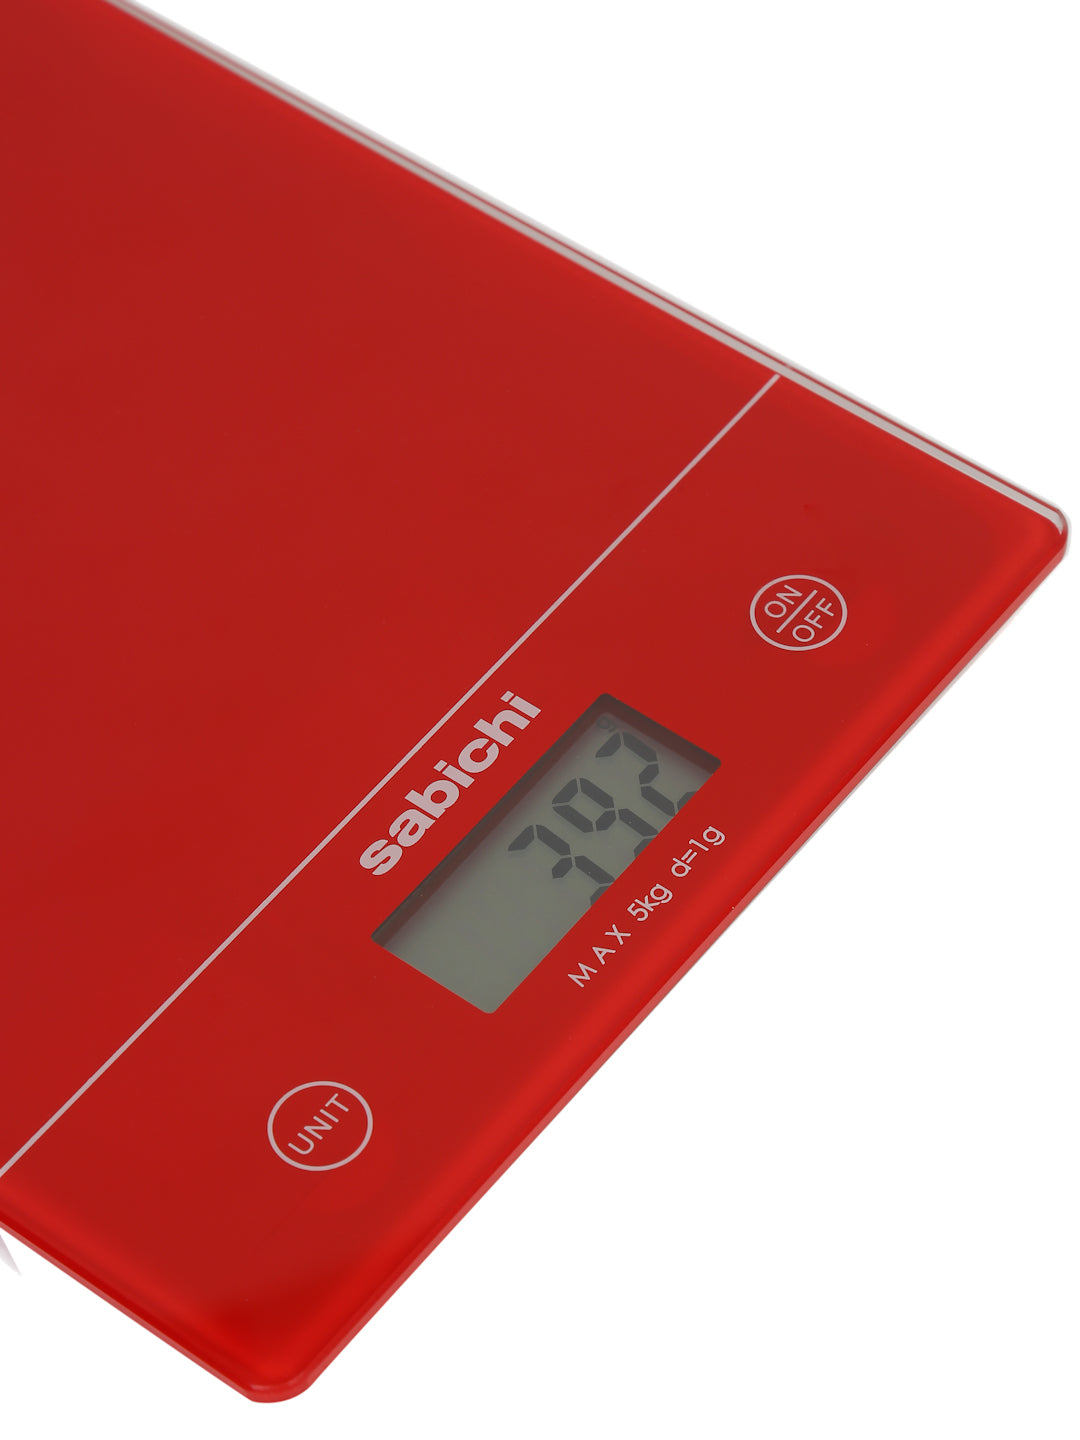 Sabichi Stainless Steel Digital Kitchen Weighing Scale, Multi-purpose Electronic Food Weight machine for Diet, Health and Fitness, 5 kg Capacity, LCD Display for Measuring fruits & Vegetables (Red) - pengessentials